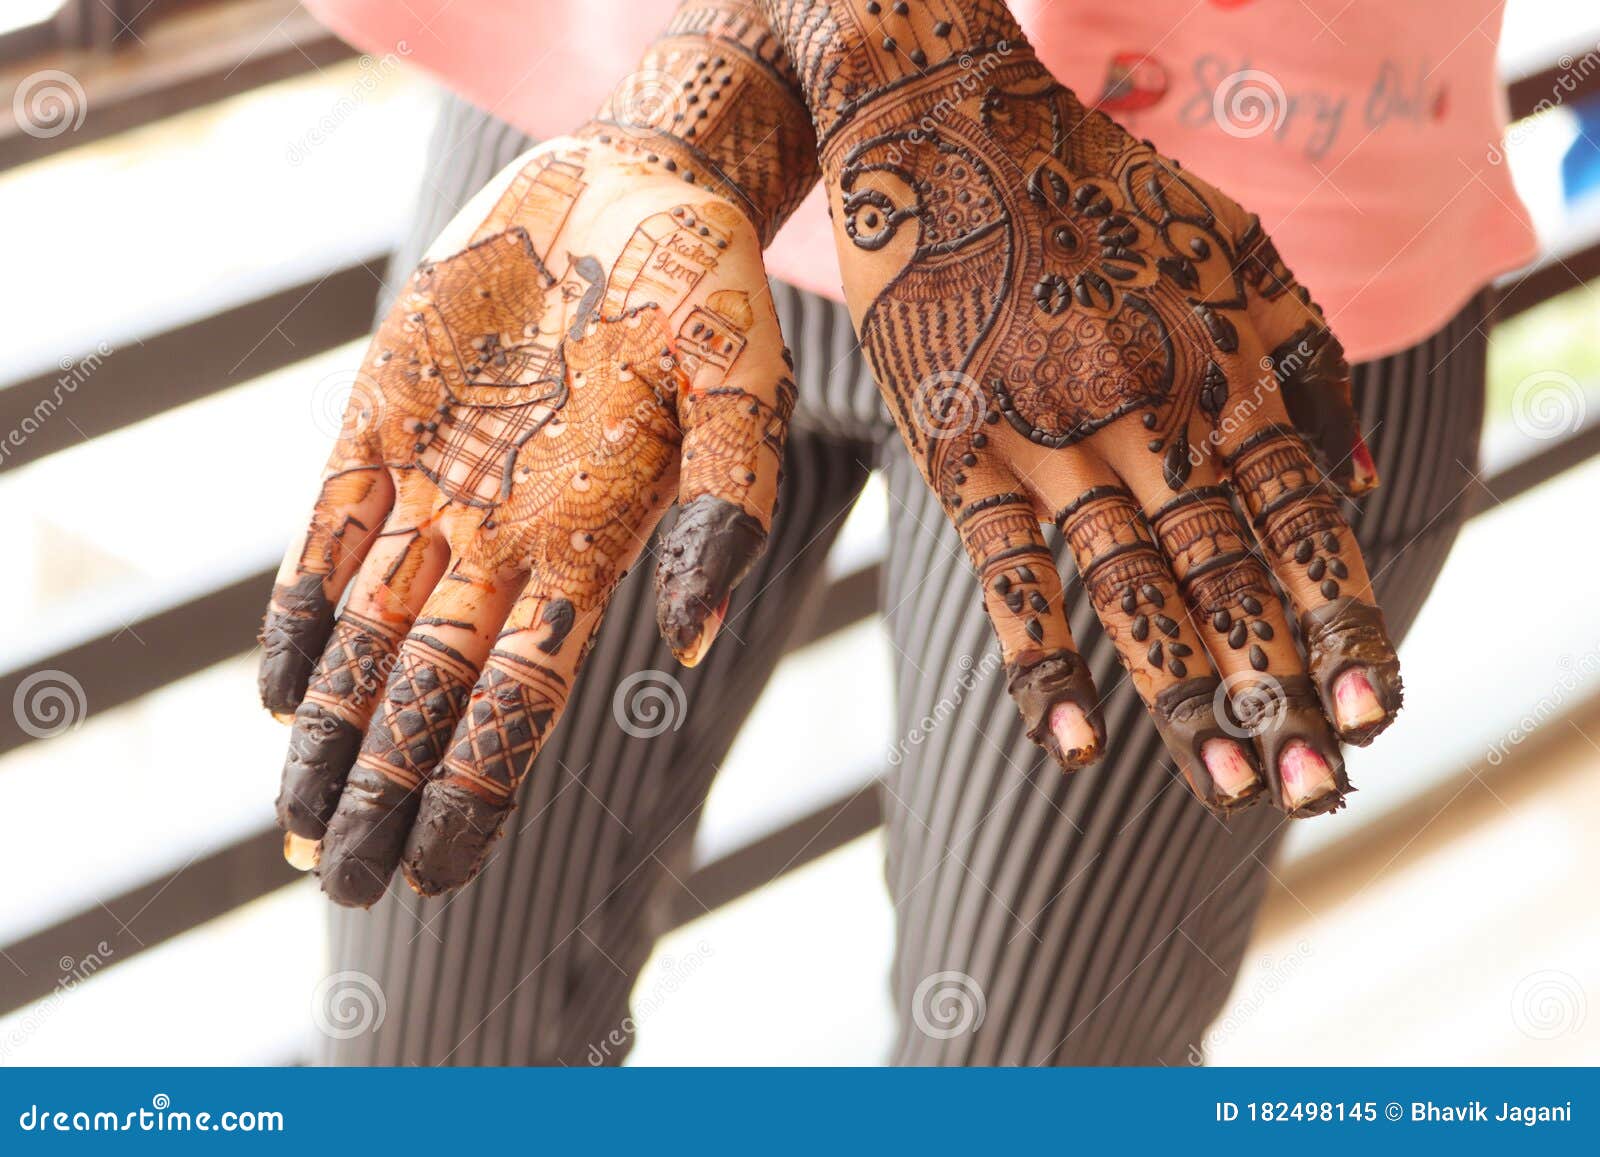 Indian Bride Showing Mehndi Tattoos Design Stock Image - Image of suits,  colorful: 182498145